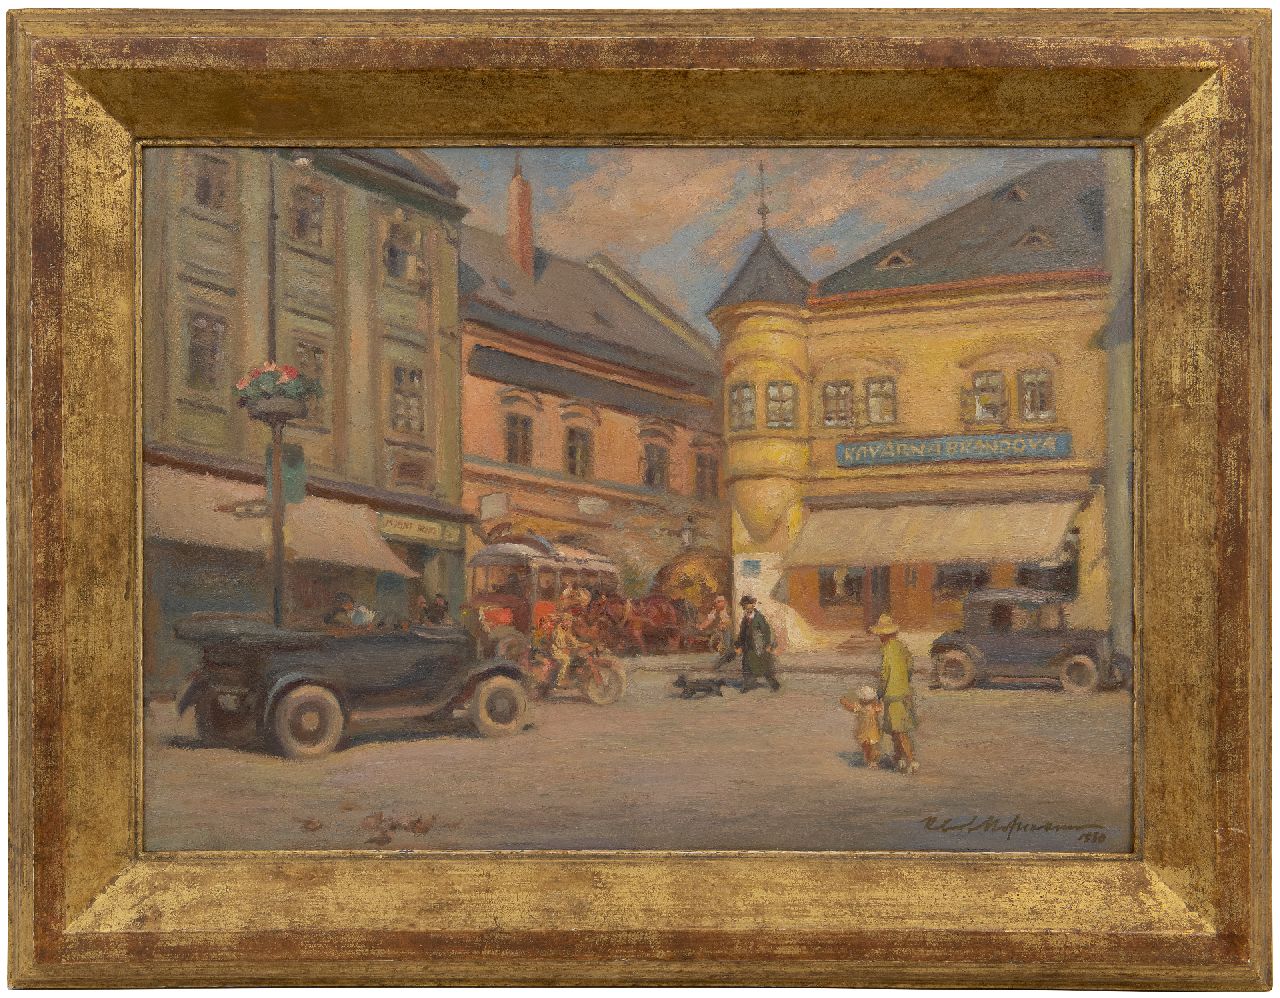 Hofmann R.  | Robert Hofmann | Paintings offered for sale | Marketplace in Kroměříž with the well known coffeehouse Kavárna Brándova, oil on painter's board 38.3 x 53.0 cm, signed l.l. and dated 1930